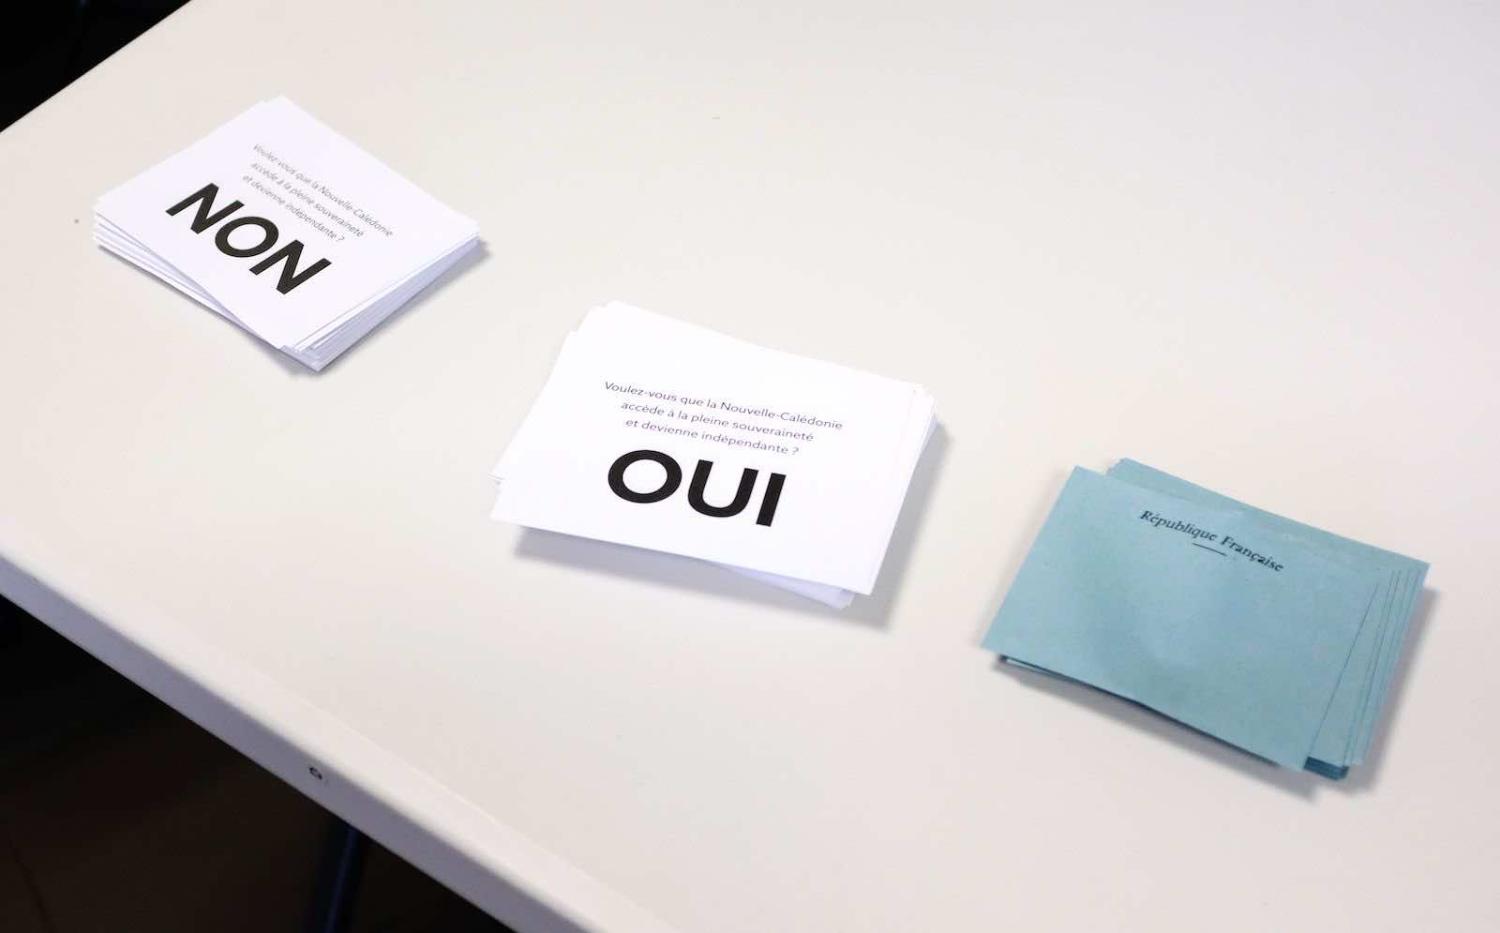 Voting forms in the referendum on independence on the French South Pacific territory of New Caledonia in Noumea on 4 October (Theo Rouby/AFP via Getty Images)